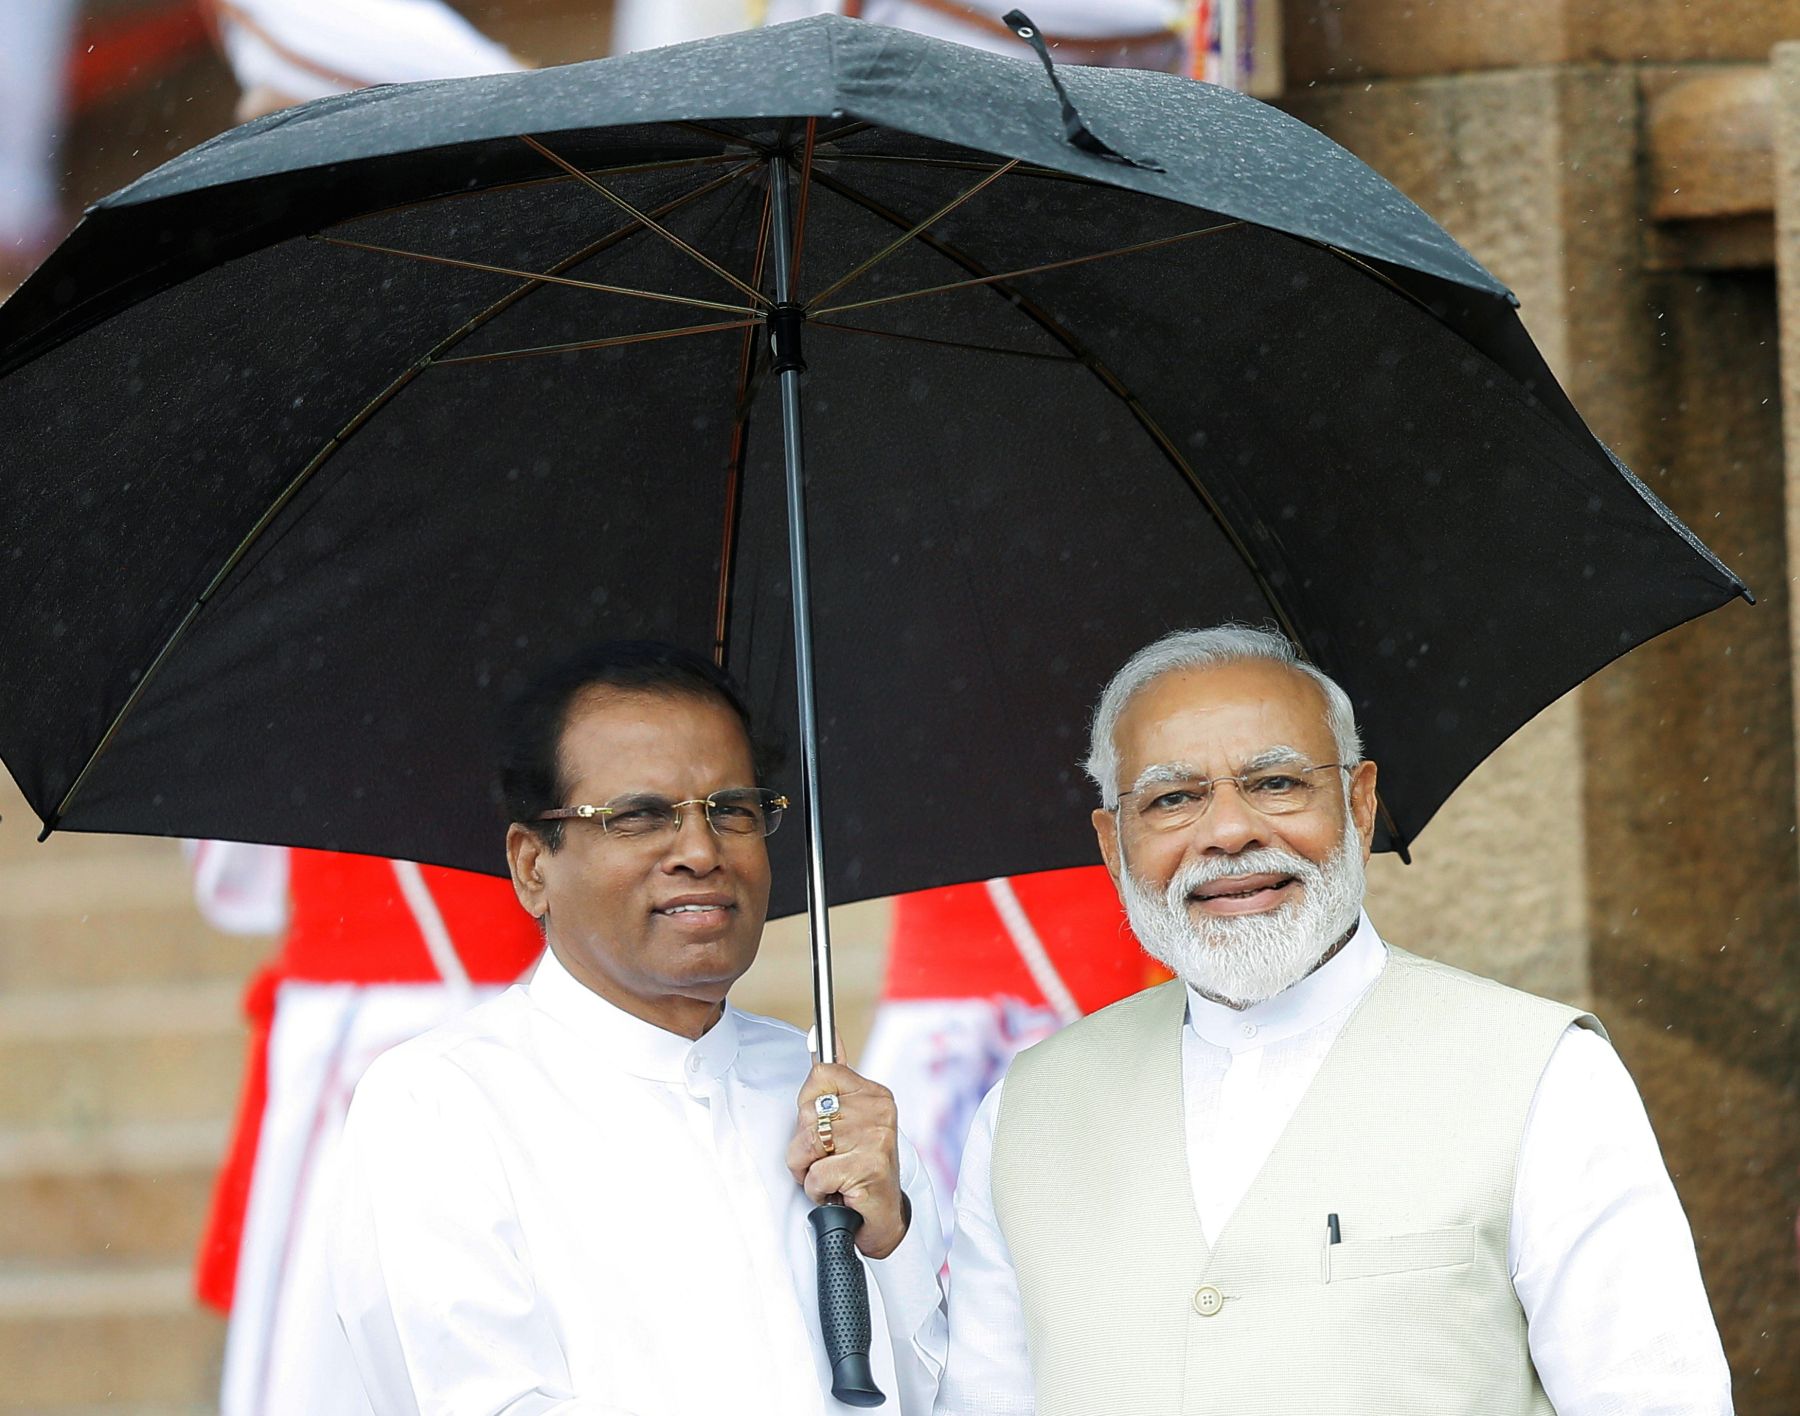 India's Prime Minister Narendra Modi is seen with Sri Lanka's President  Maithripala Sirisena during his welcome ceremony at the Presidential  Secretariat in Colombo